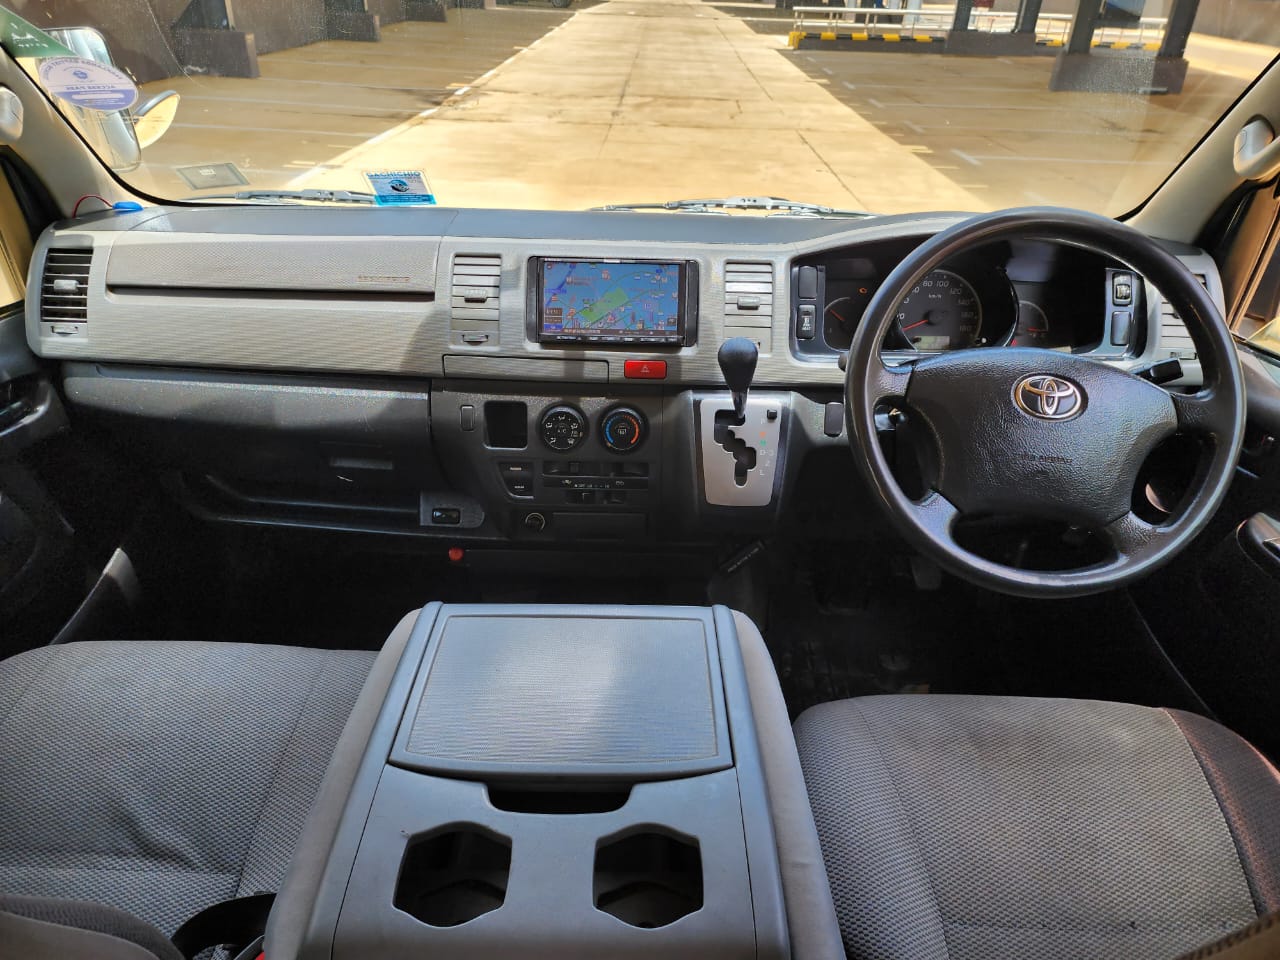 Toyota HIACE 7L DIESEL 14 SEATER Private You Pay 40% DEPOSIT TRADE IN OK